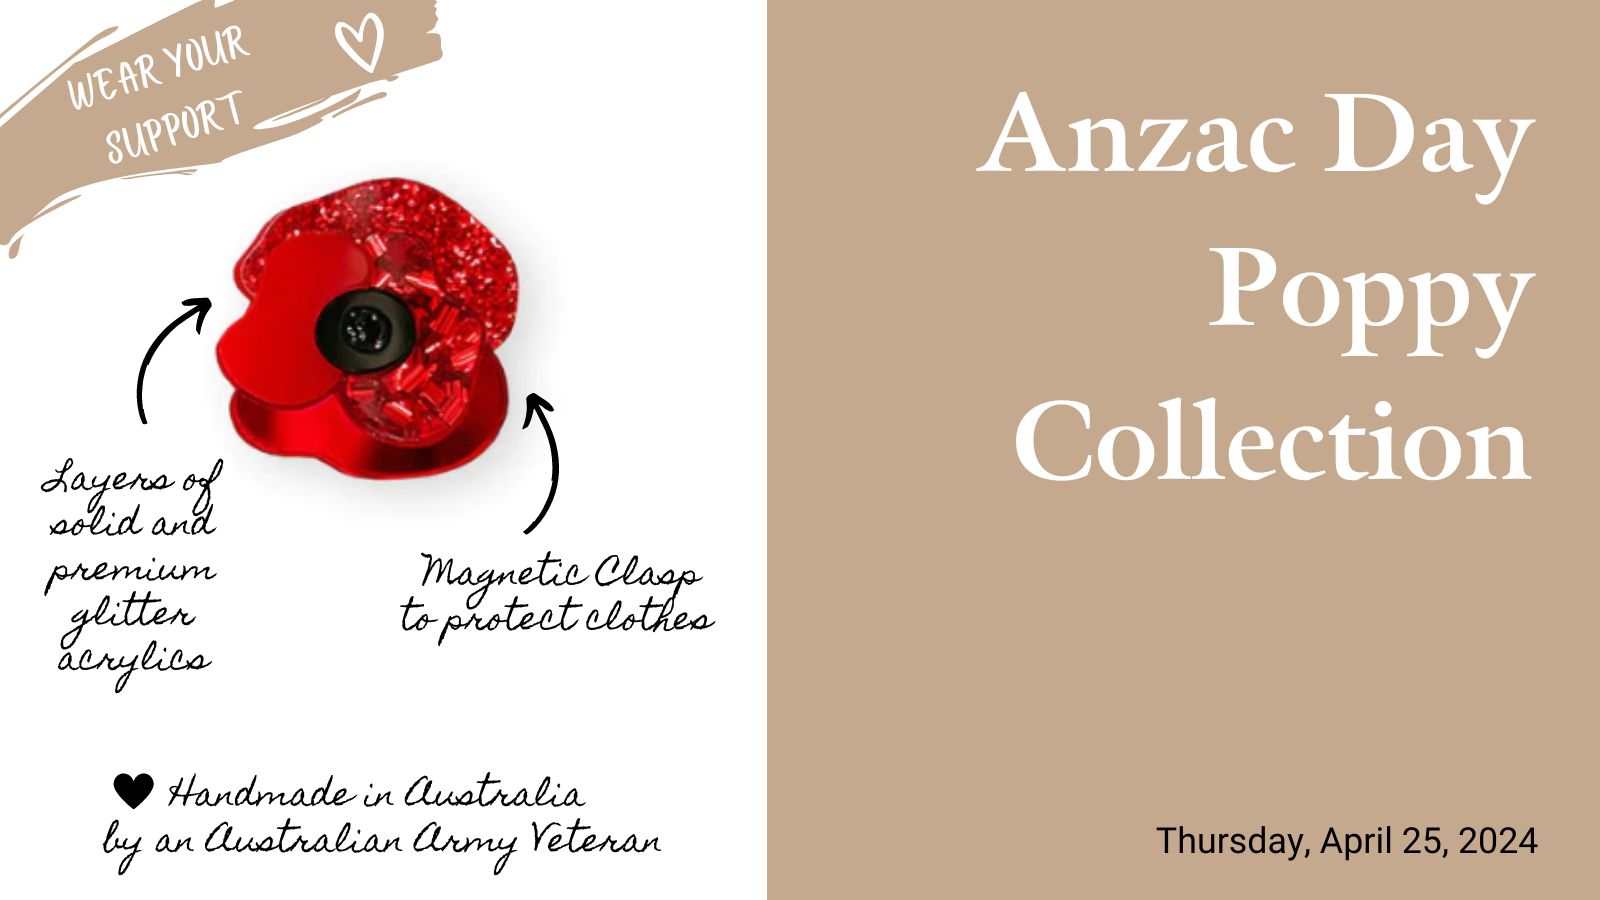 ANZAC Day lapel pins and more